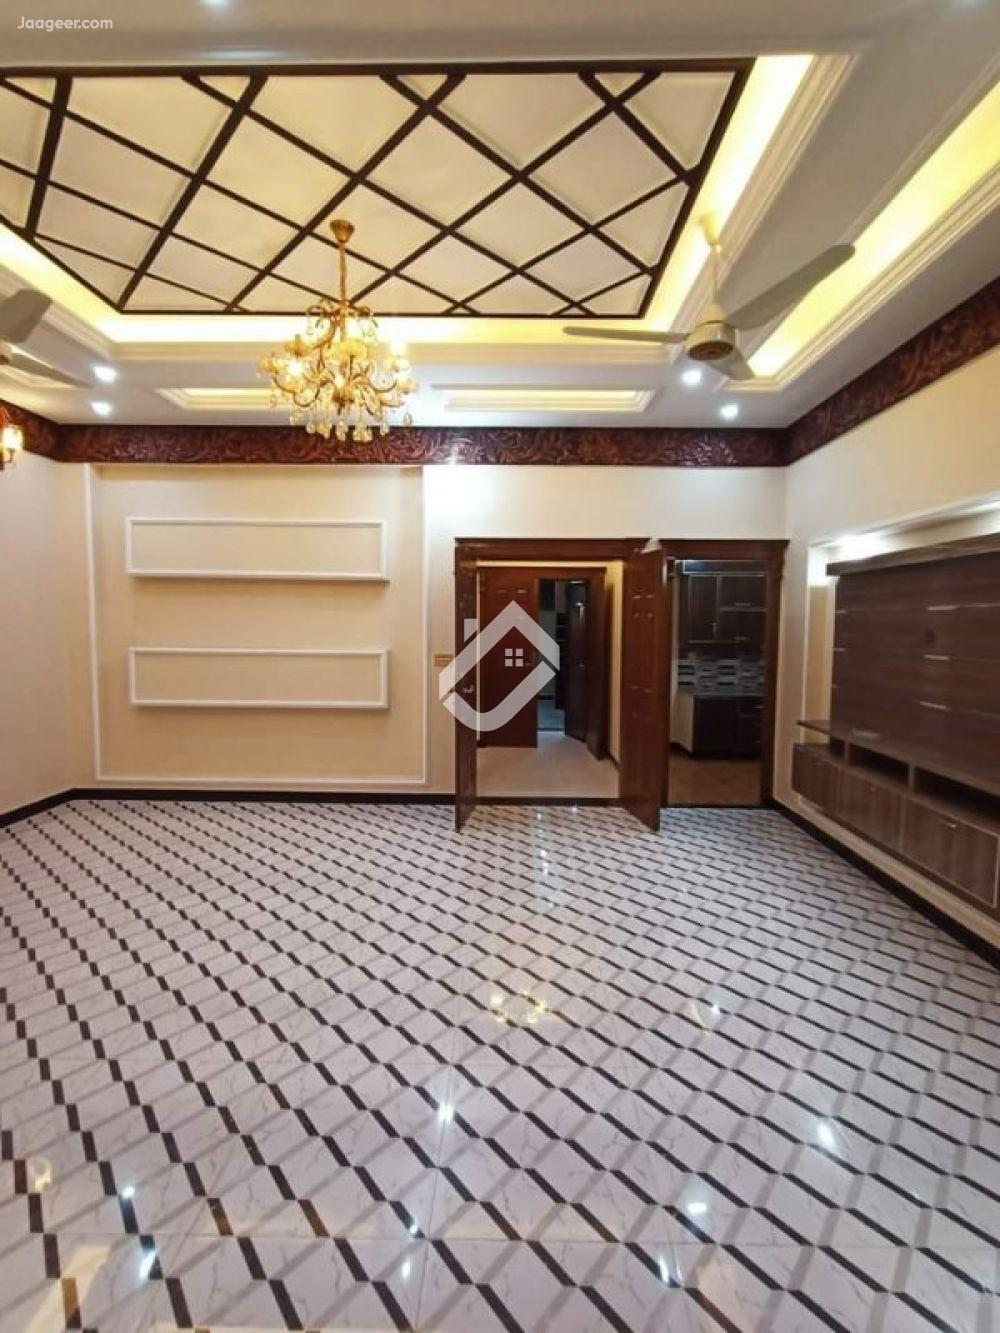 View  10 Marla Double Storey House For Sale In Gulberg Town in Gulberg Town, Sheikhupura